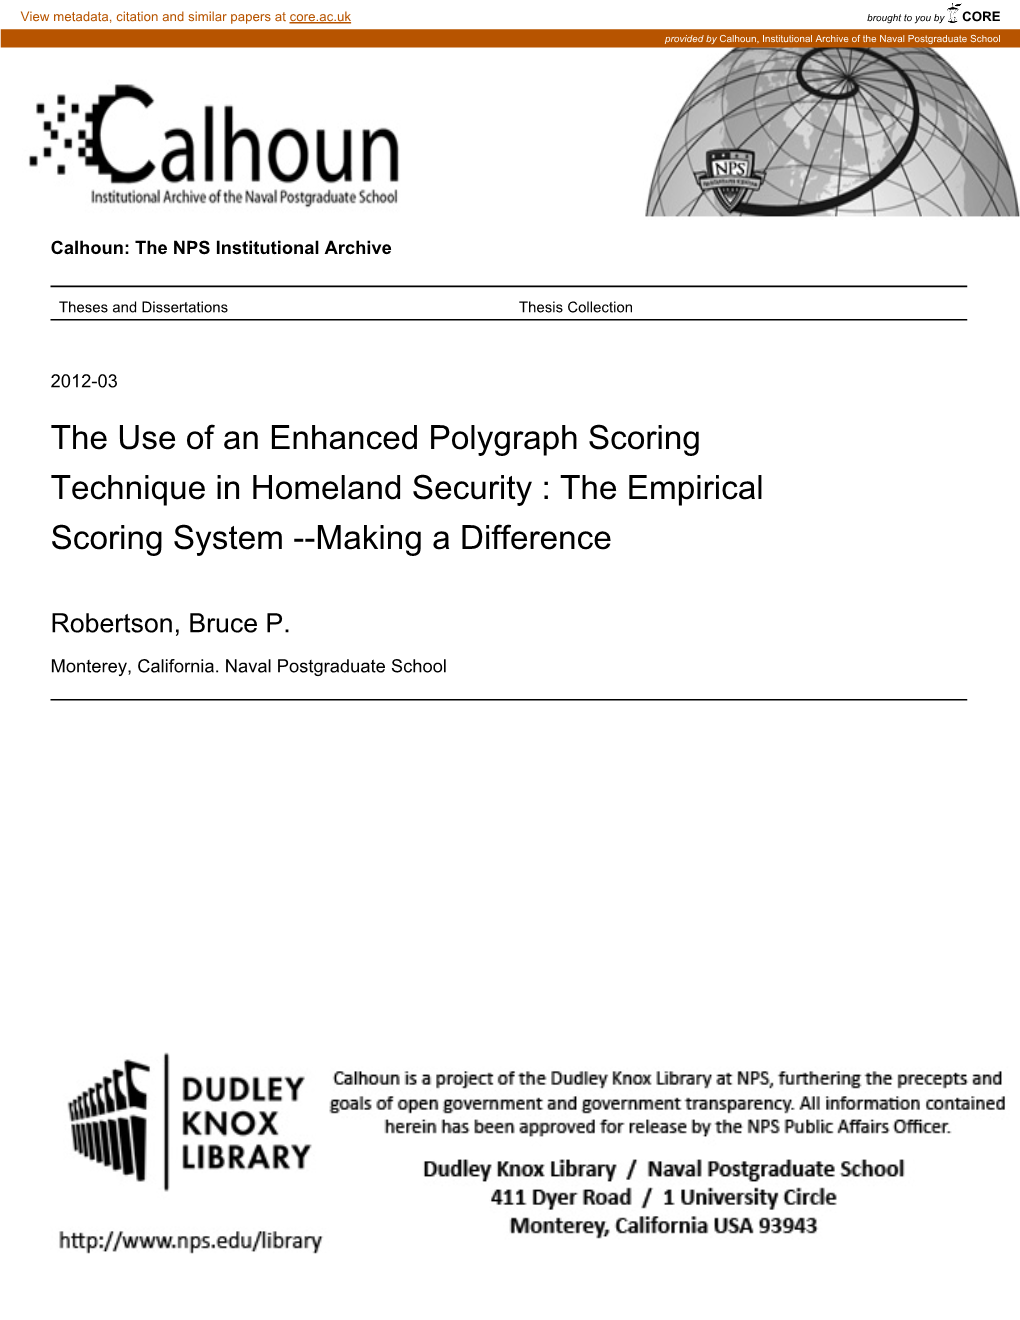 The Use of an Enhanced Polygraph Scoring Technique in Homeland Security : the Empirical Scoring System --Making a Difference